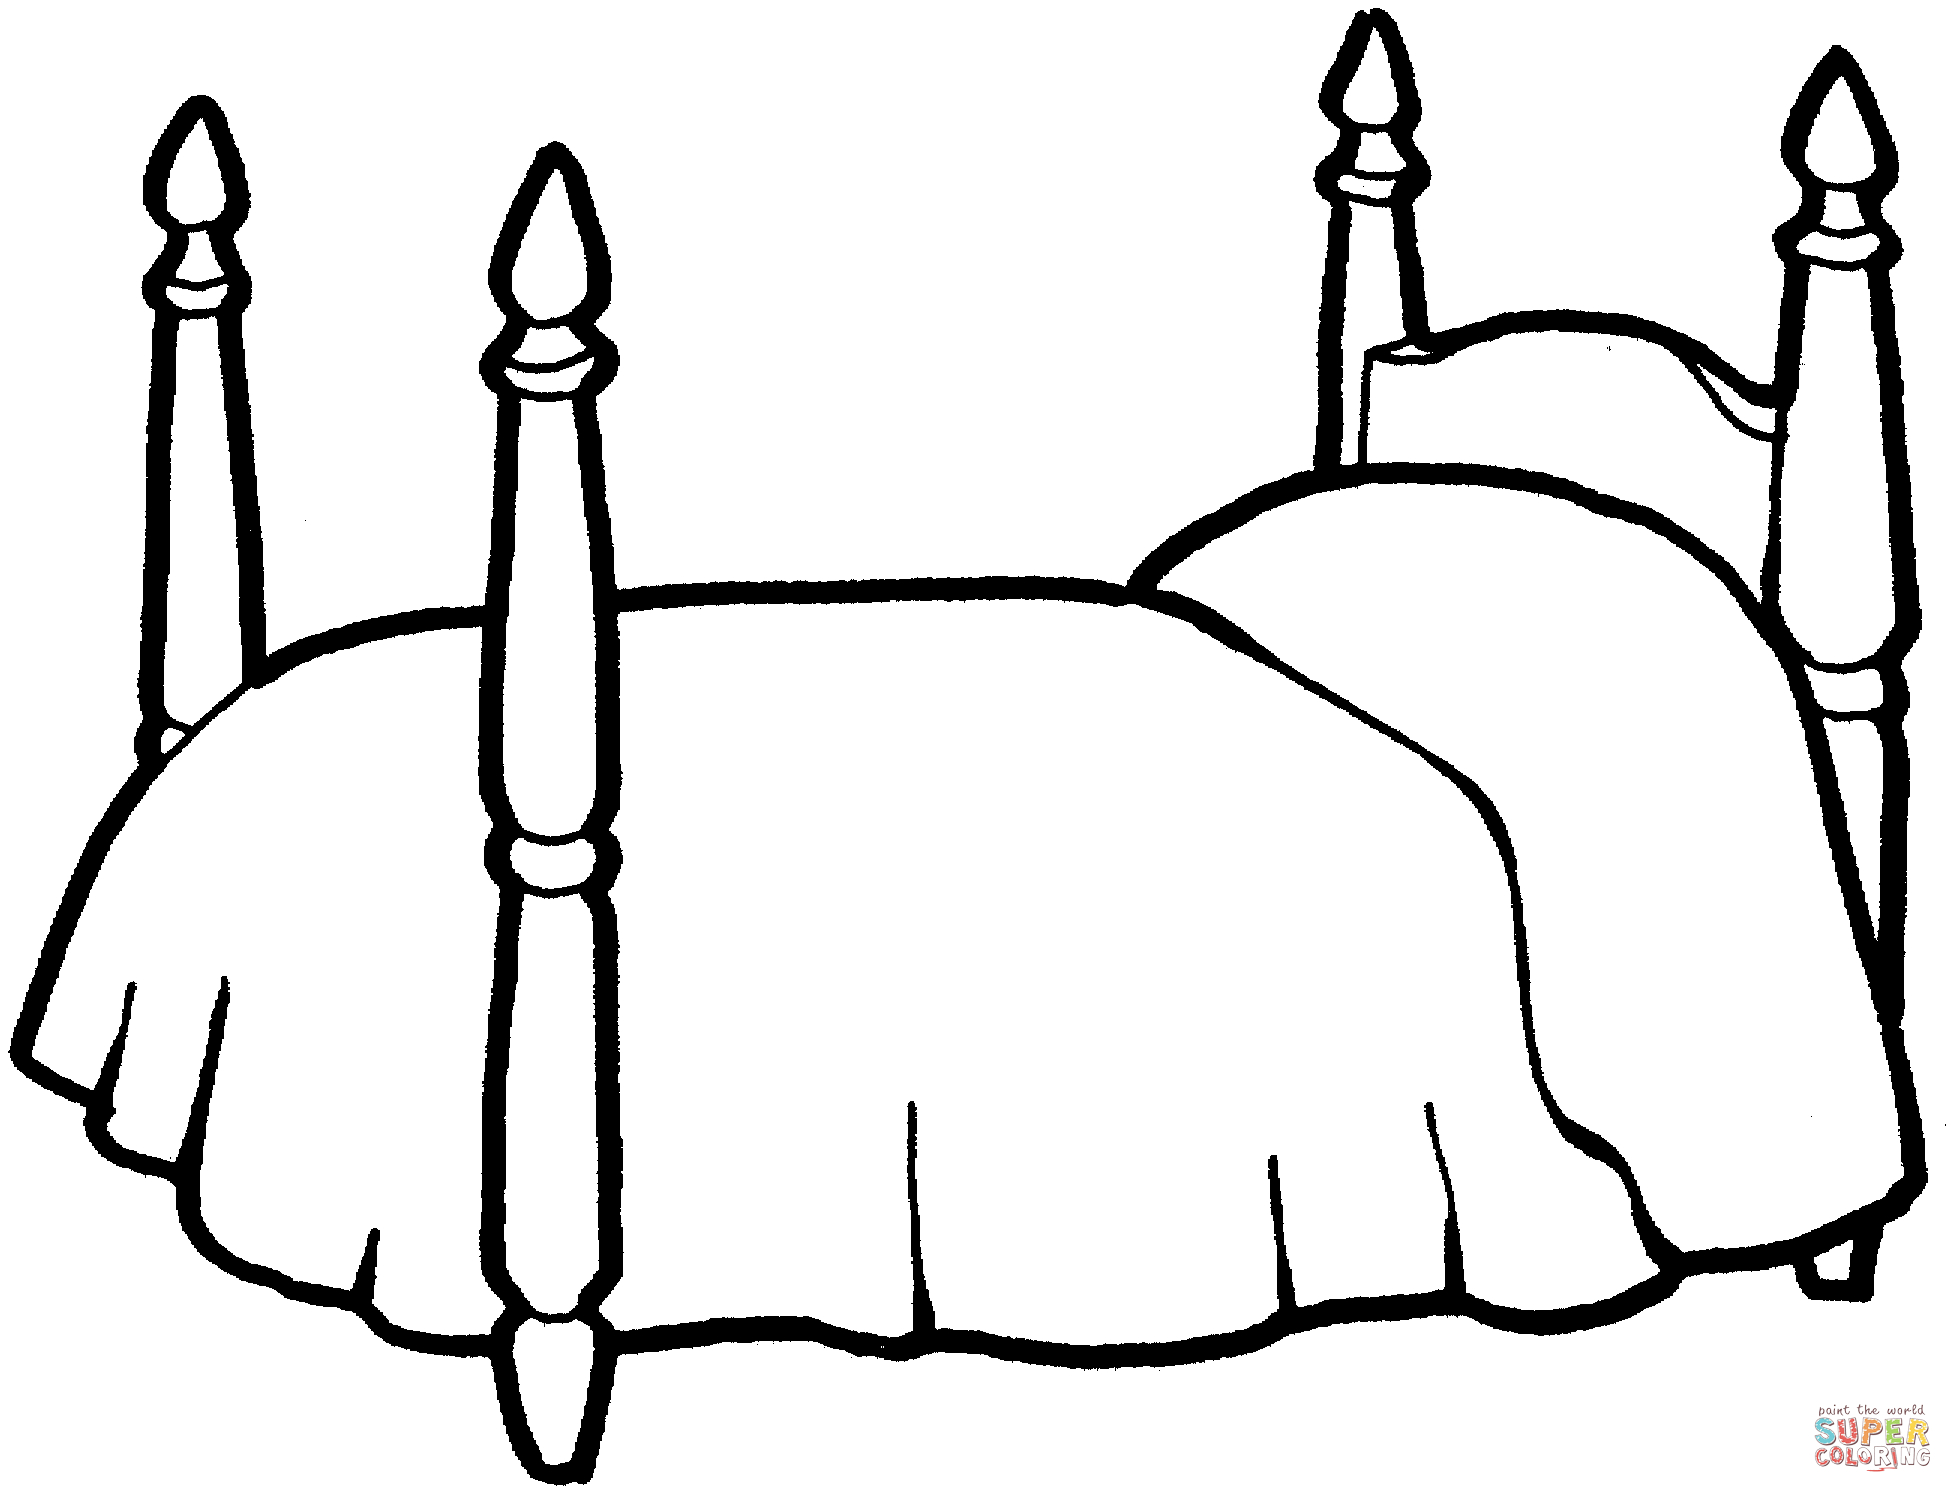 Marvelous Photo of Bed Coloring Page - birijus.com